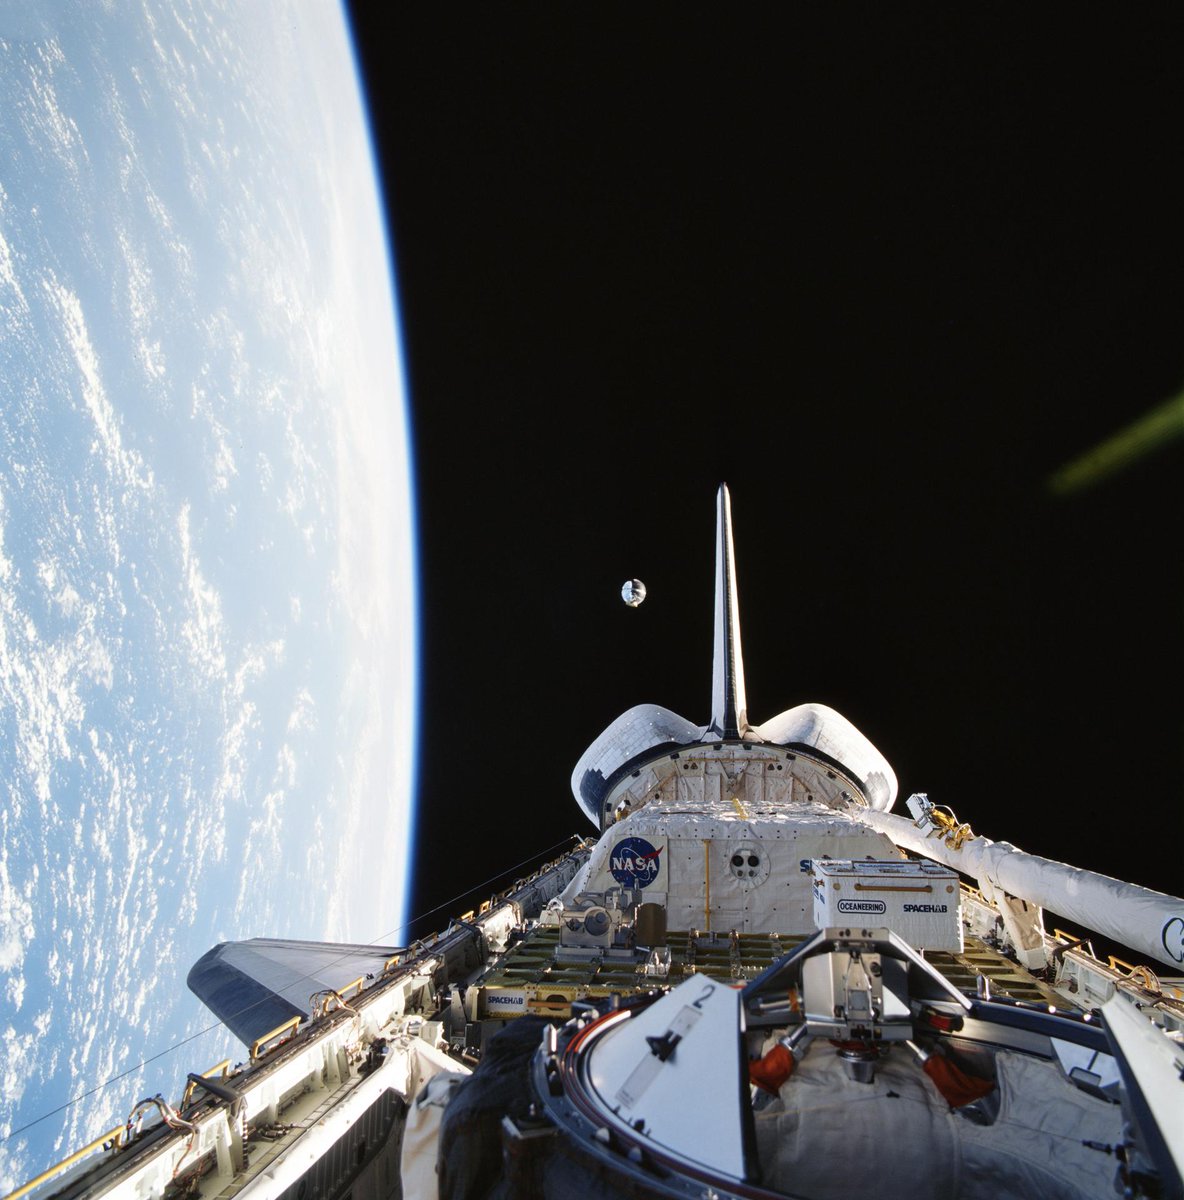 25 years ago today, the Student-Tracked Atmospheric Research Satellite for Heuristic International Networking Experiment (STARSHINE) satellite was deployed from the cargo bay of Space Shuttle Discovery near the completion of the almost ten-day STS-96 mission.